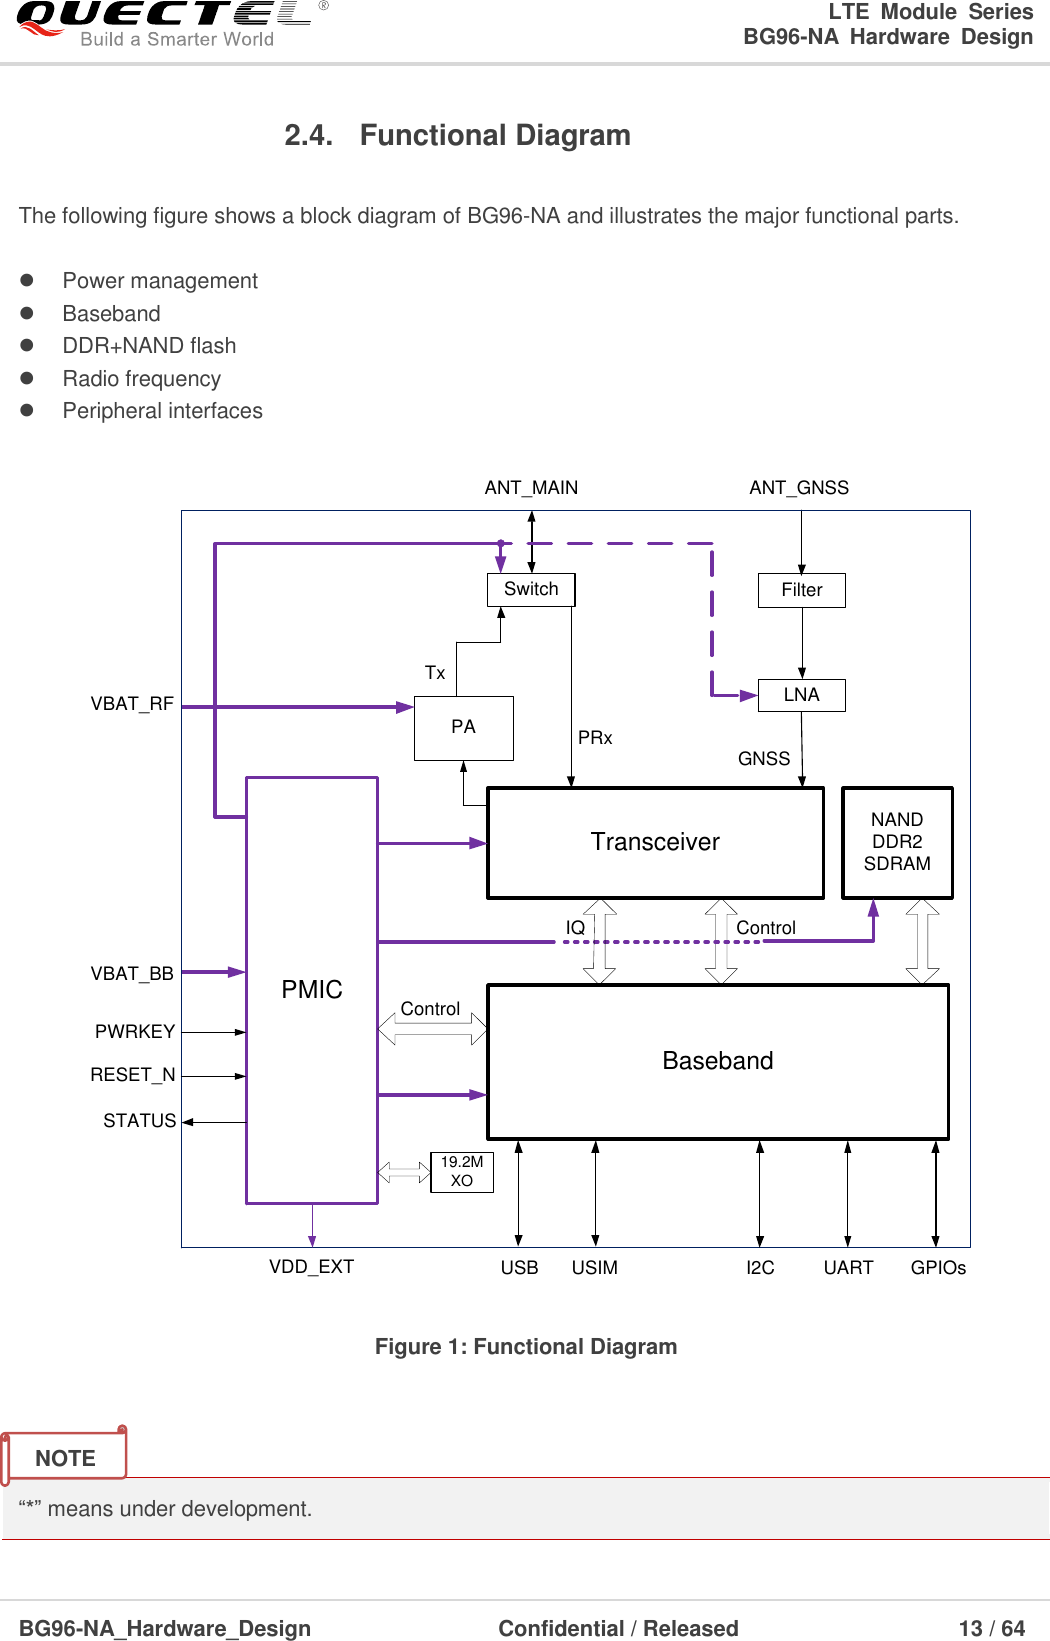 LTE  Module  Series                                                  BG96-NA  Hardware  Design  BG96-NA_Hardware_Design                              Confidential / Released                                  13 / 64    2.4.  Functional Diagram  The following figure shows a block diagram of BG96-NA and illustrates the major functional parts.      Power management   Baseband   DDR+NAND flash   Radio frequency   Peripheral interfaces BasebandPMICTransceiver NANDDDR2SDRAMPASwitch FilterANT_MAIN ANT_GNSSVBAT_BBVBAT_RFPWRKEYVDD_EXT USB USIM UARTI2CRESET_N19.2MXOSTATUSGPIOsControlIQ ControlLNATxPRx GNSS Figure 1: Functional Diagram   “*” means under development. NOTE 